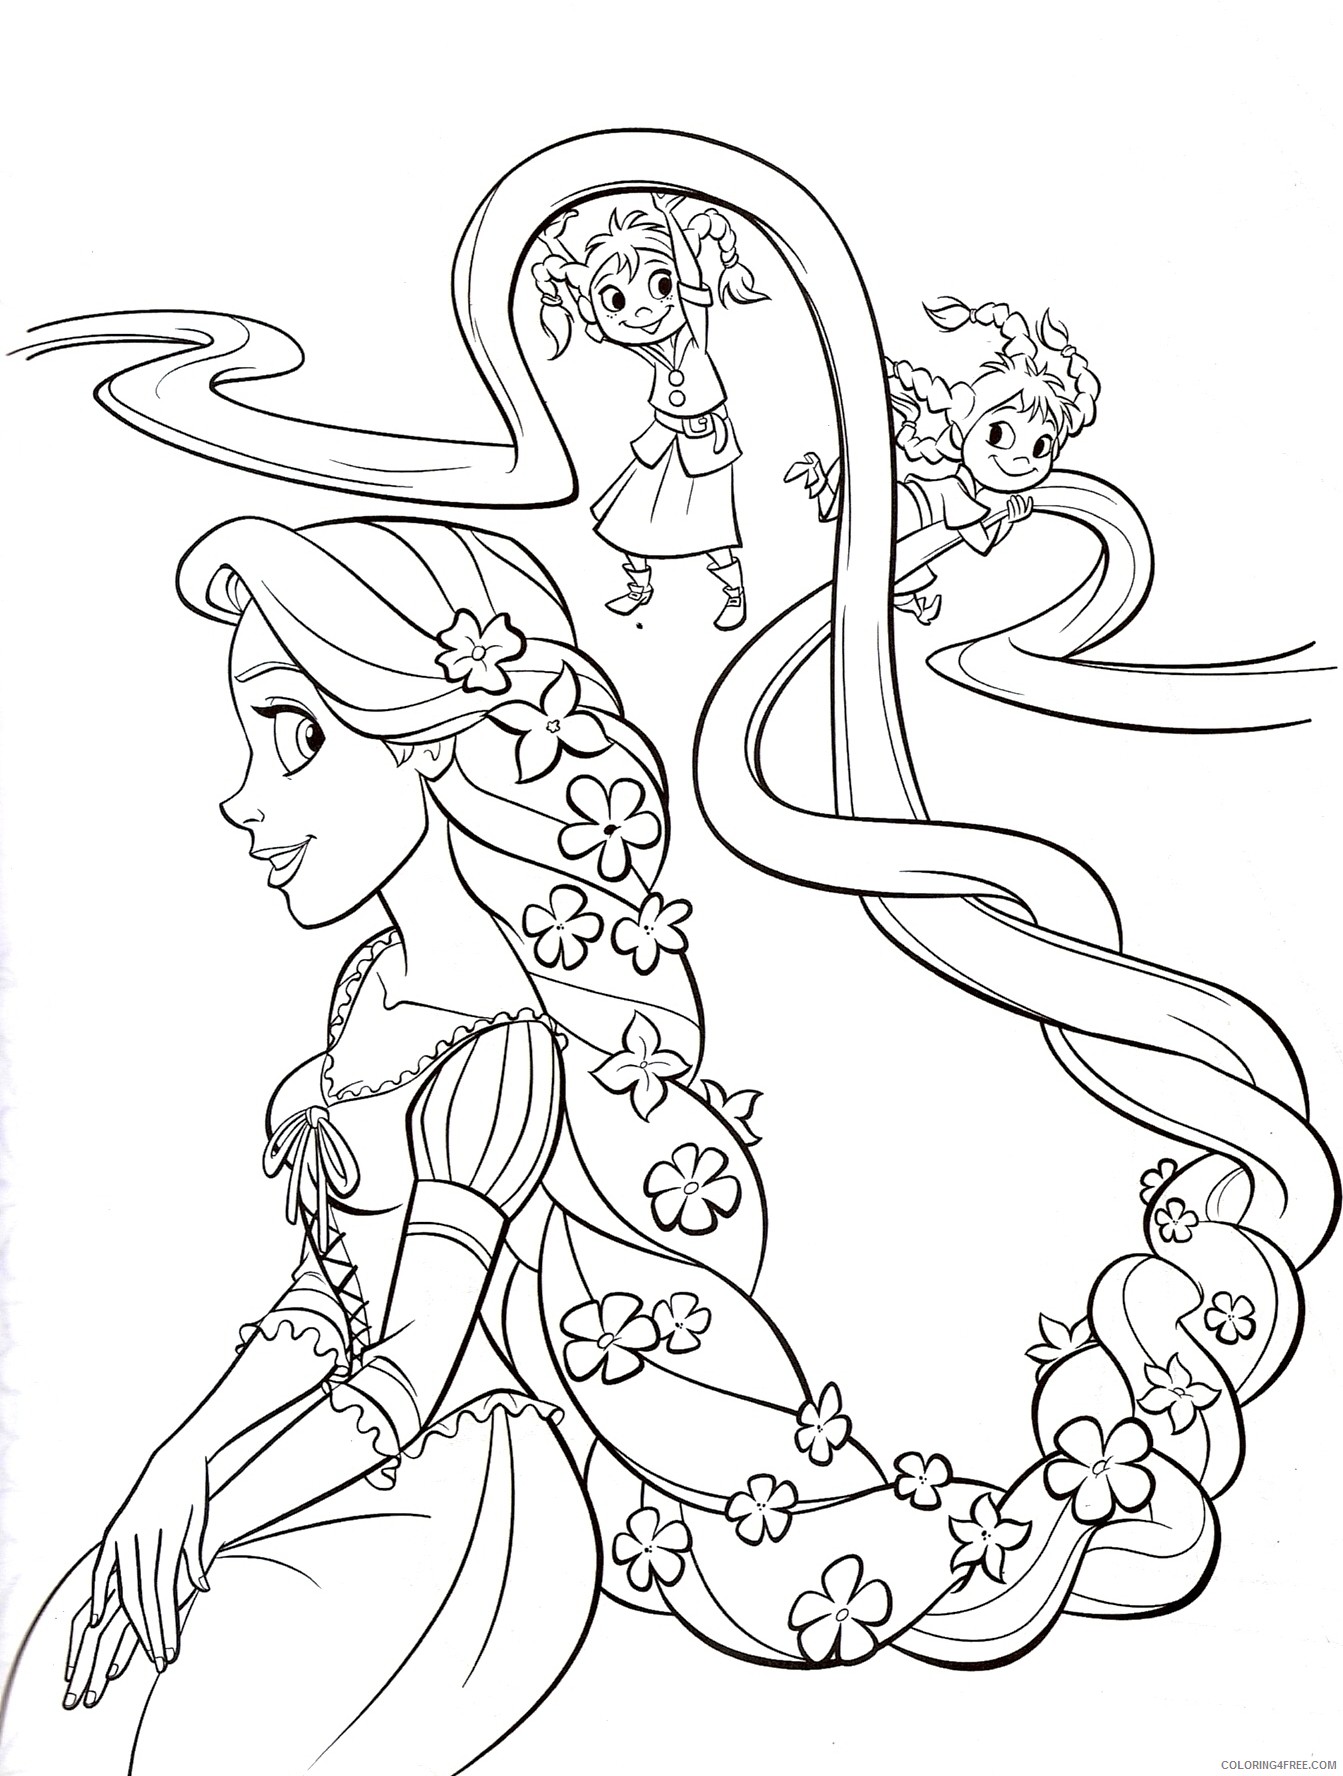 Rapunzel Coloring Pages Cartoons Tangled Rapunzel Printable 2020 5351 Coloring4free